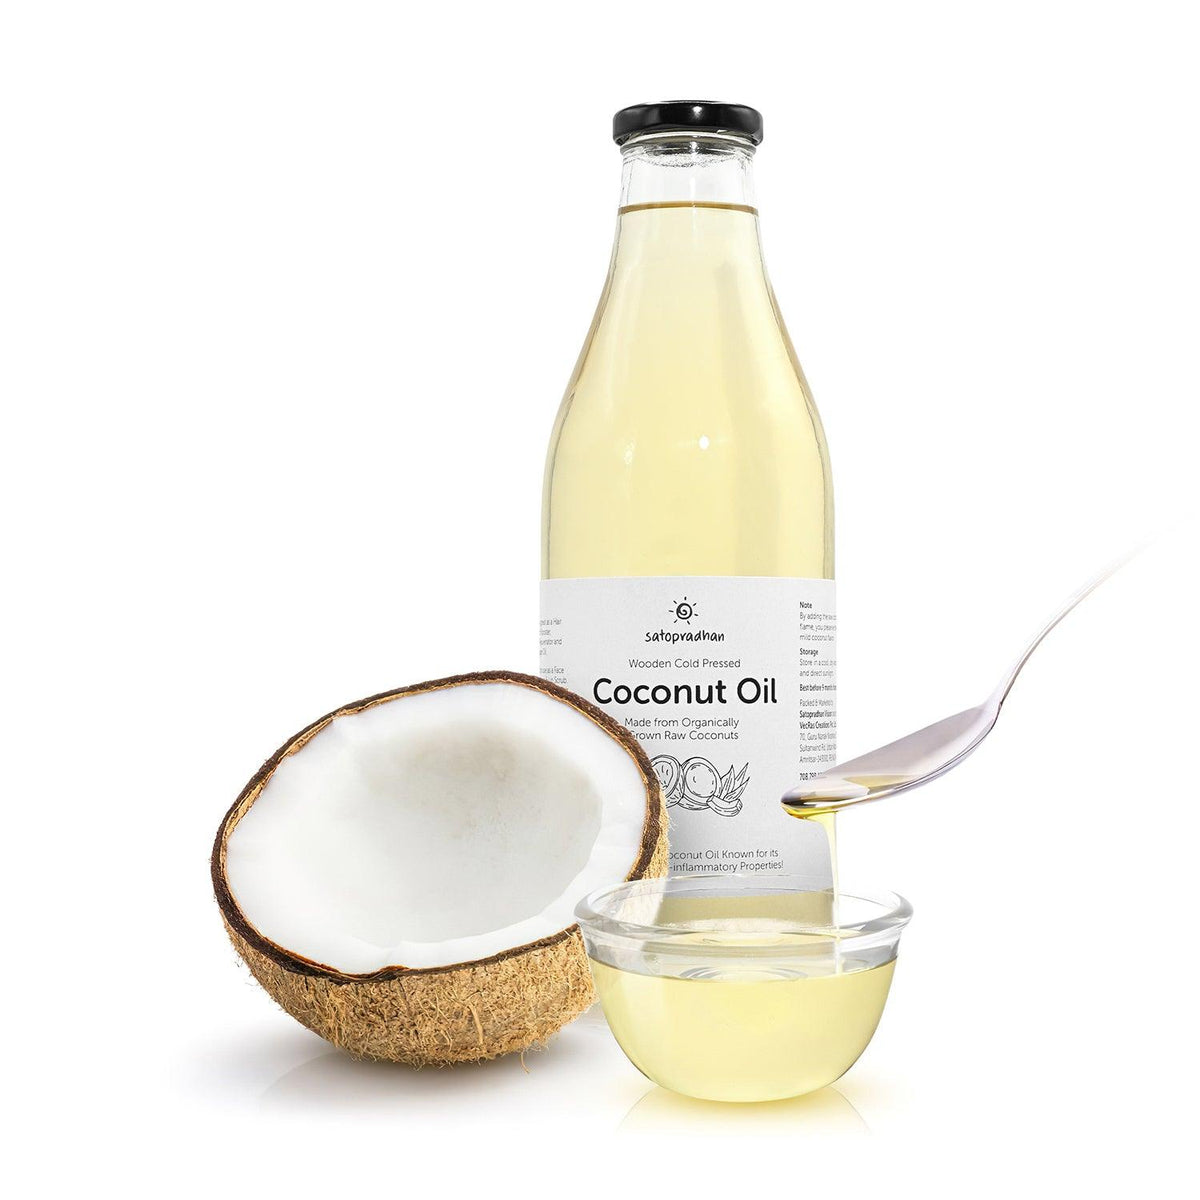 Coconut Oil - 100% Organic, Virgin & Wooden Cold-pressed 1000ml Multipurpose Oil Without Chemicals in a Reusable Glass Bottle (Kachi Ghani) - Satopradhan